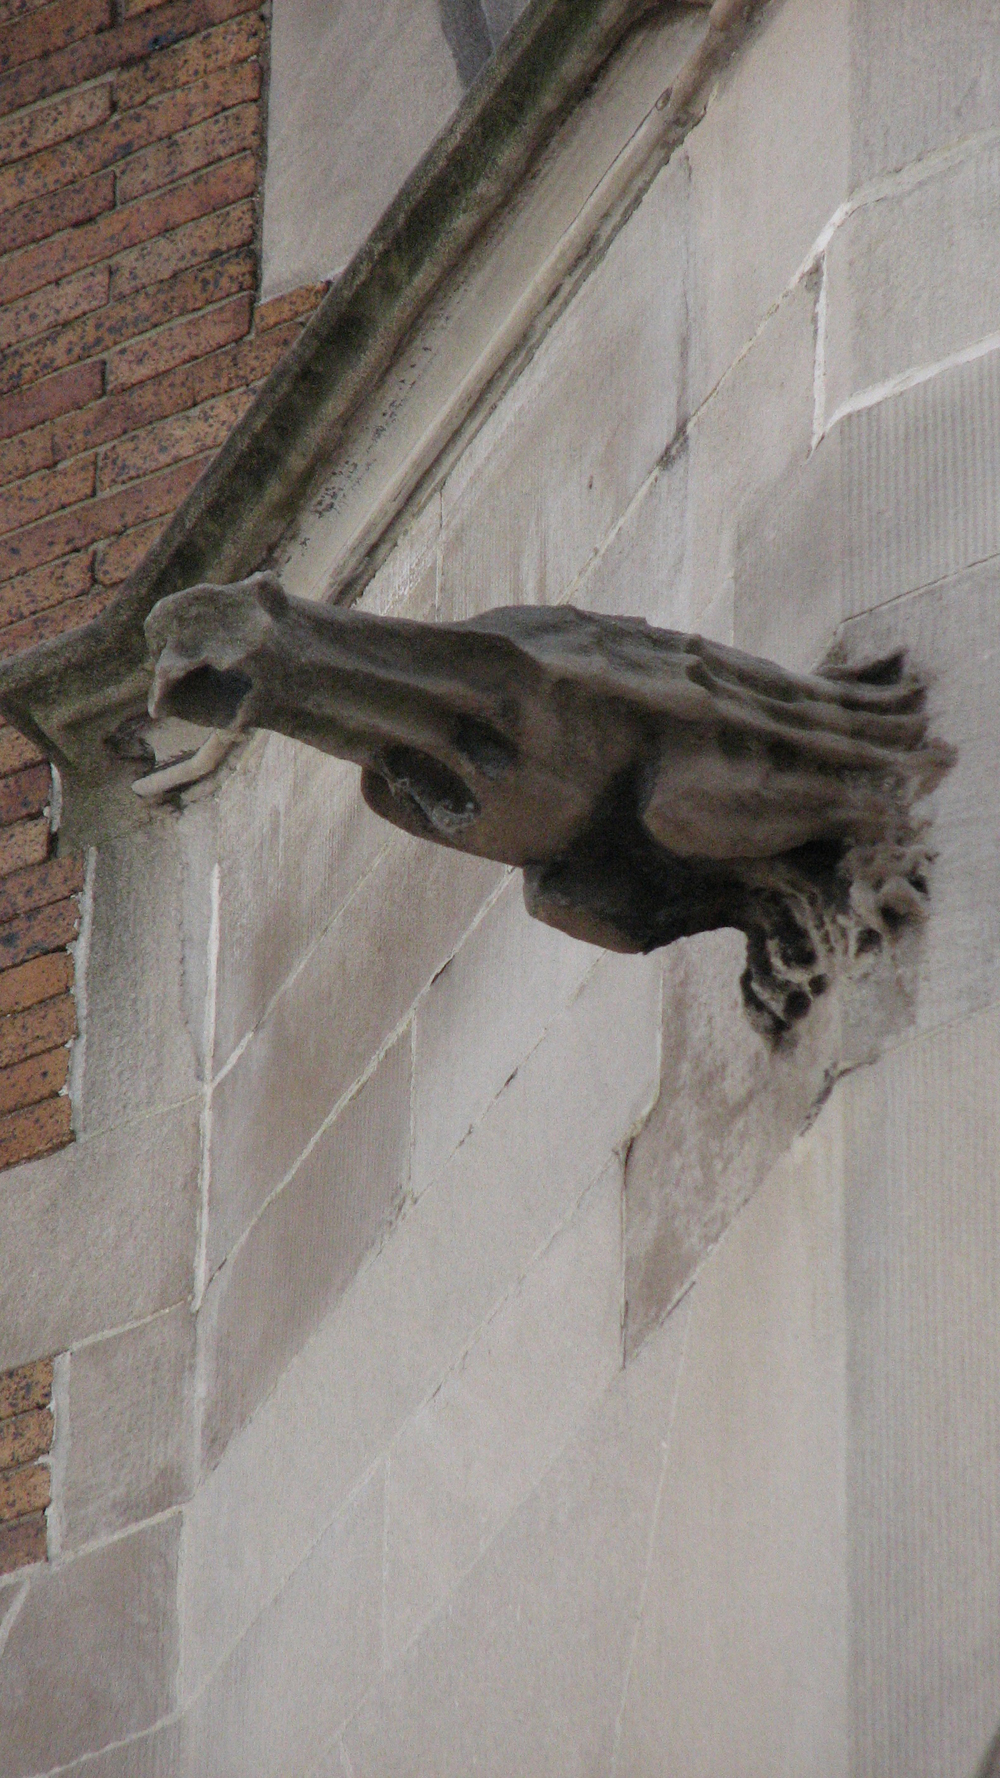 A French gargoyle leaps from the side of the house.